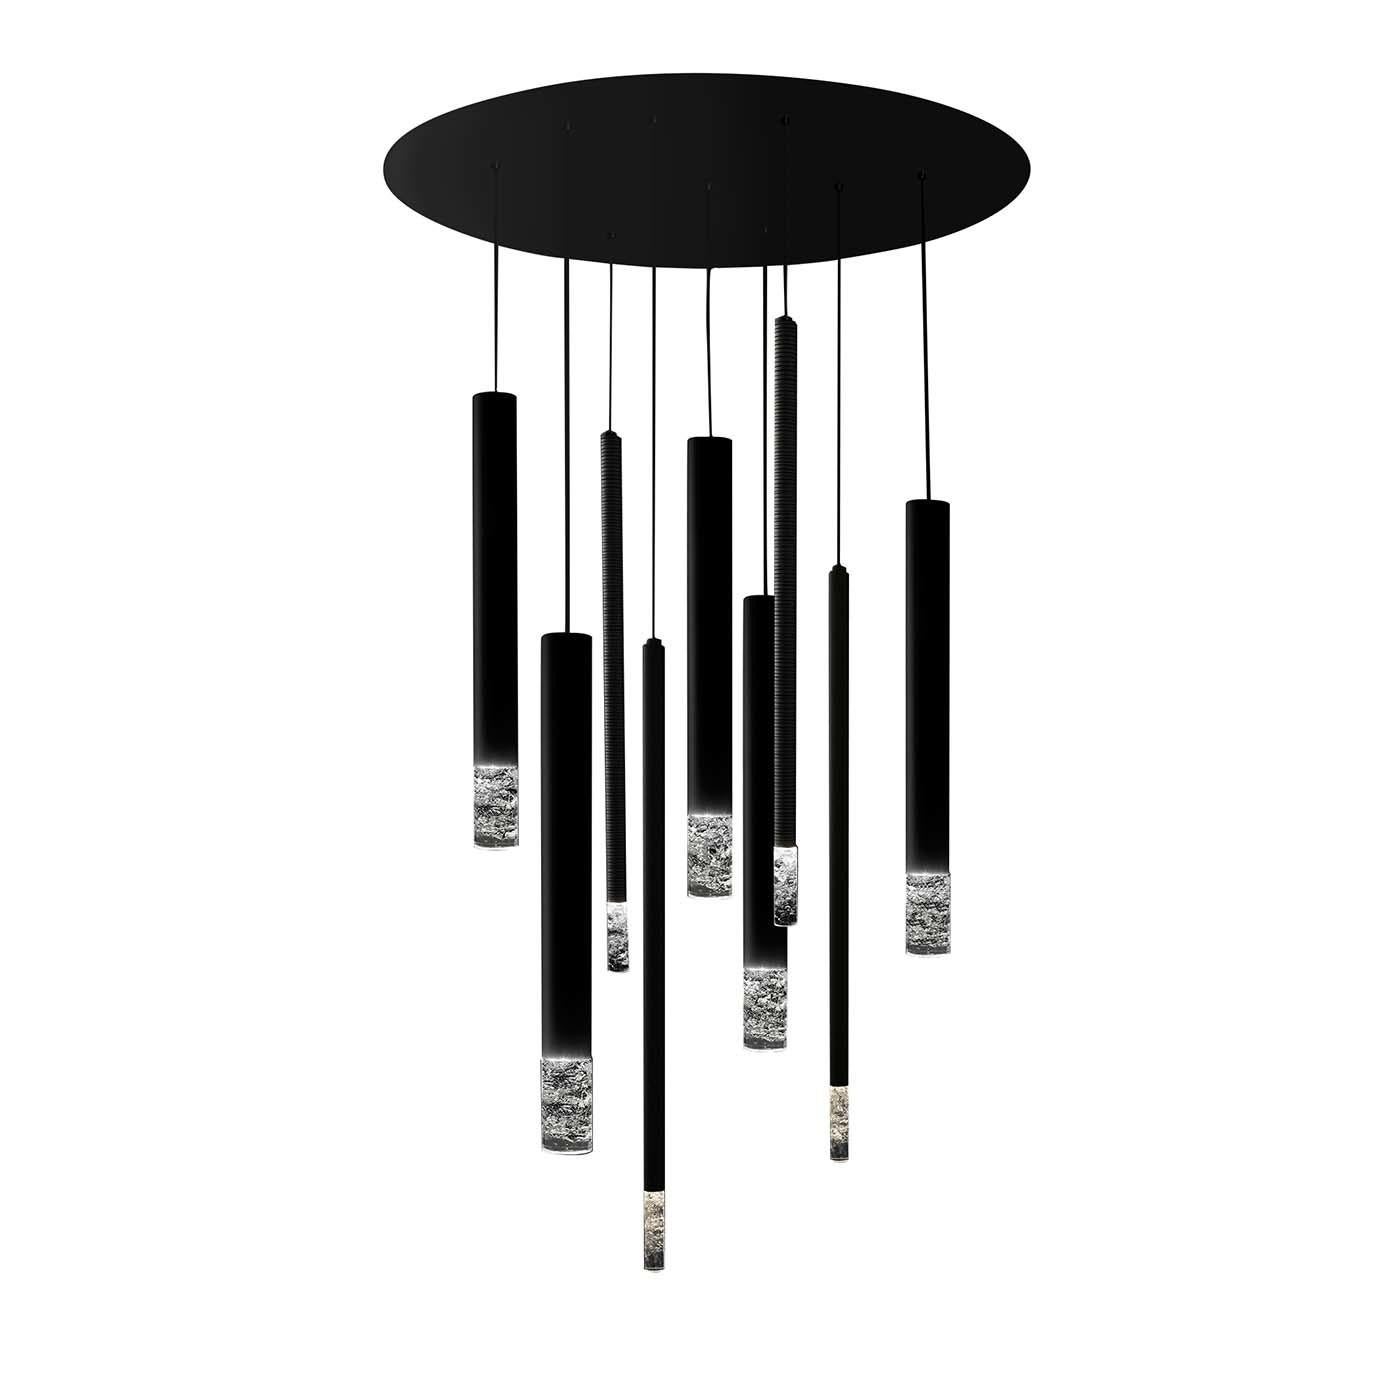 Included in the Ubo collection of unique elegant lamps with a modern design, the Ubi model features two pendant lamps suspended at different lengths from a round metal ceiling plate with a black matte finish. Each pendant measures 55 cm and is